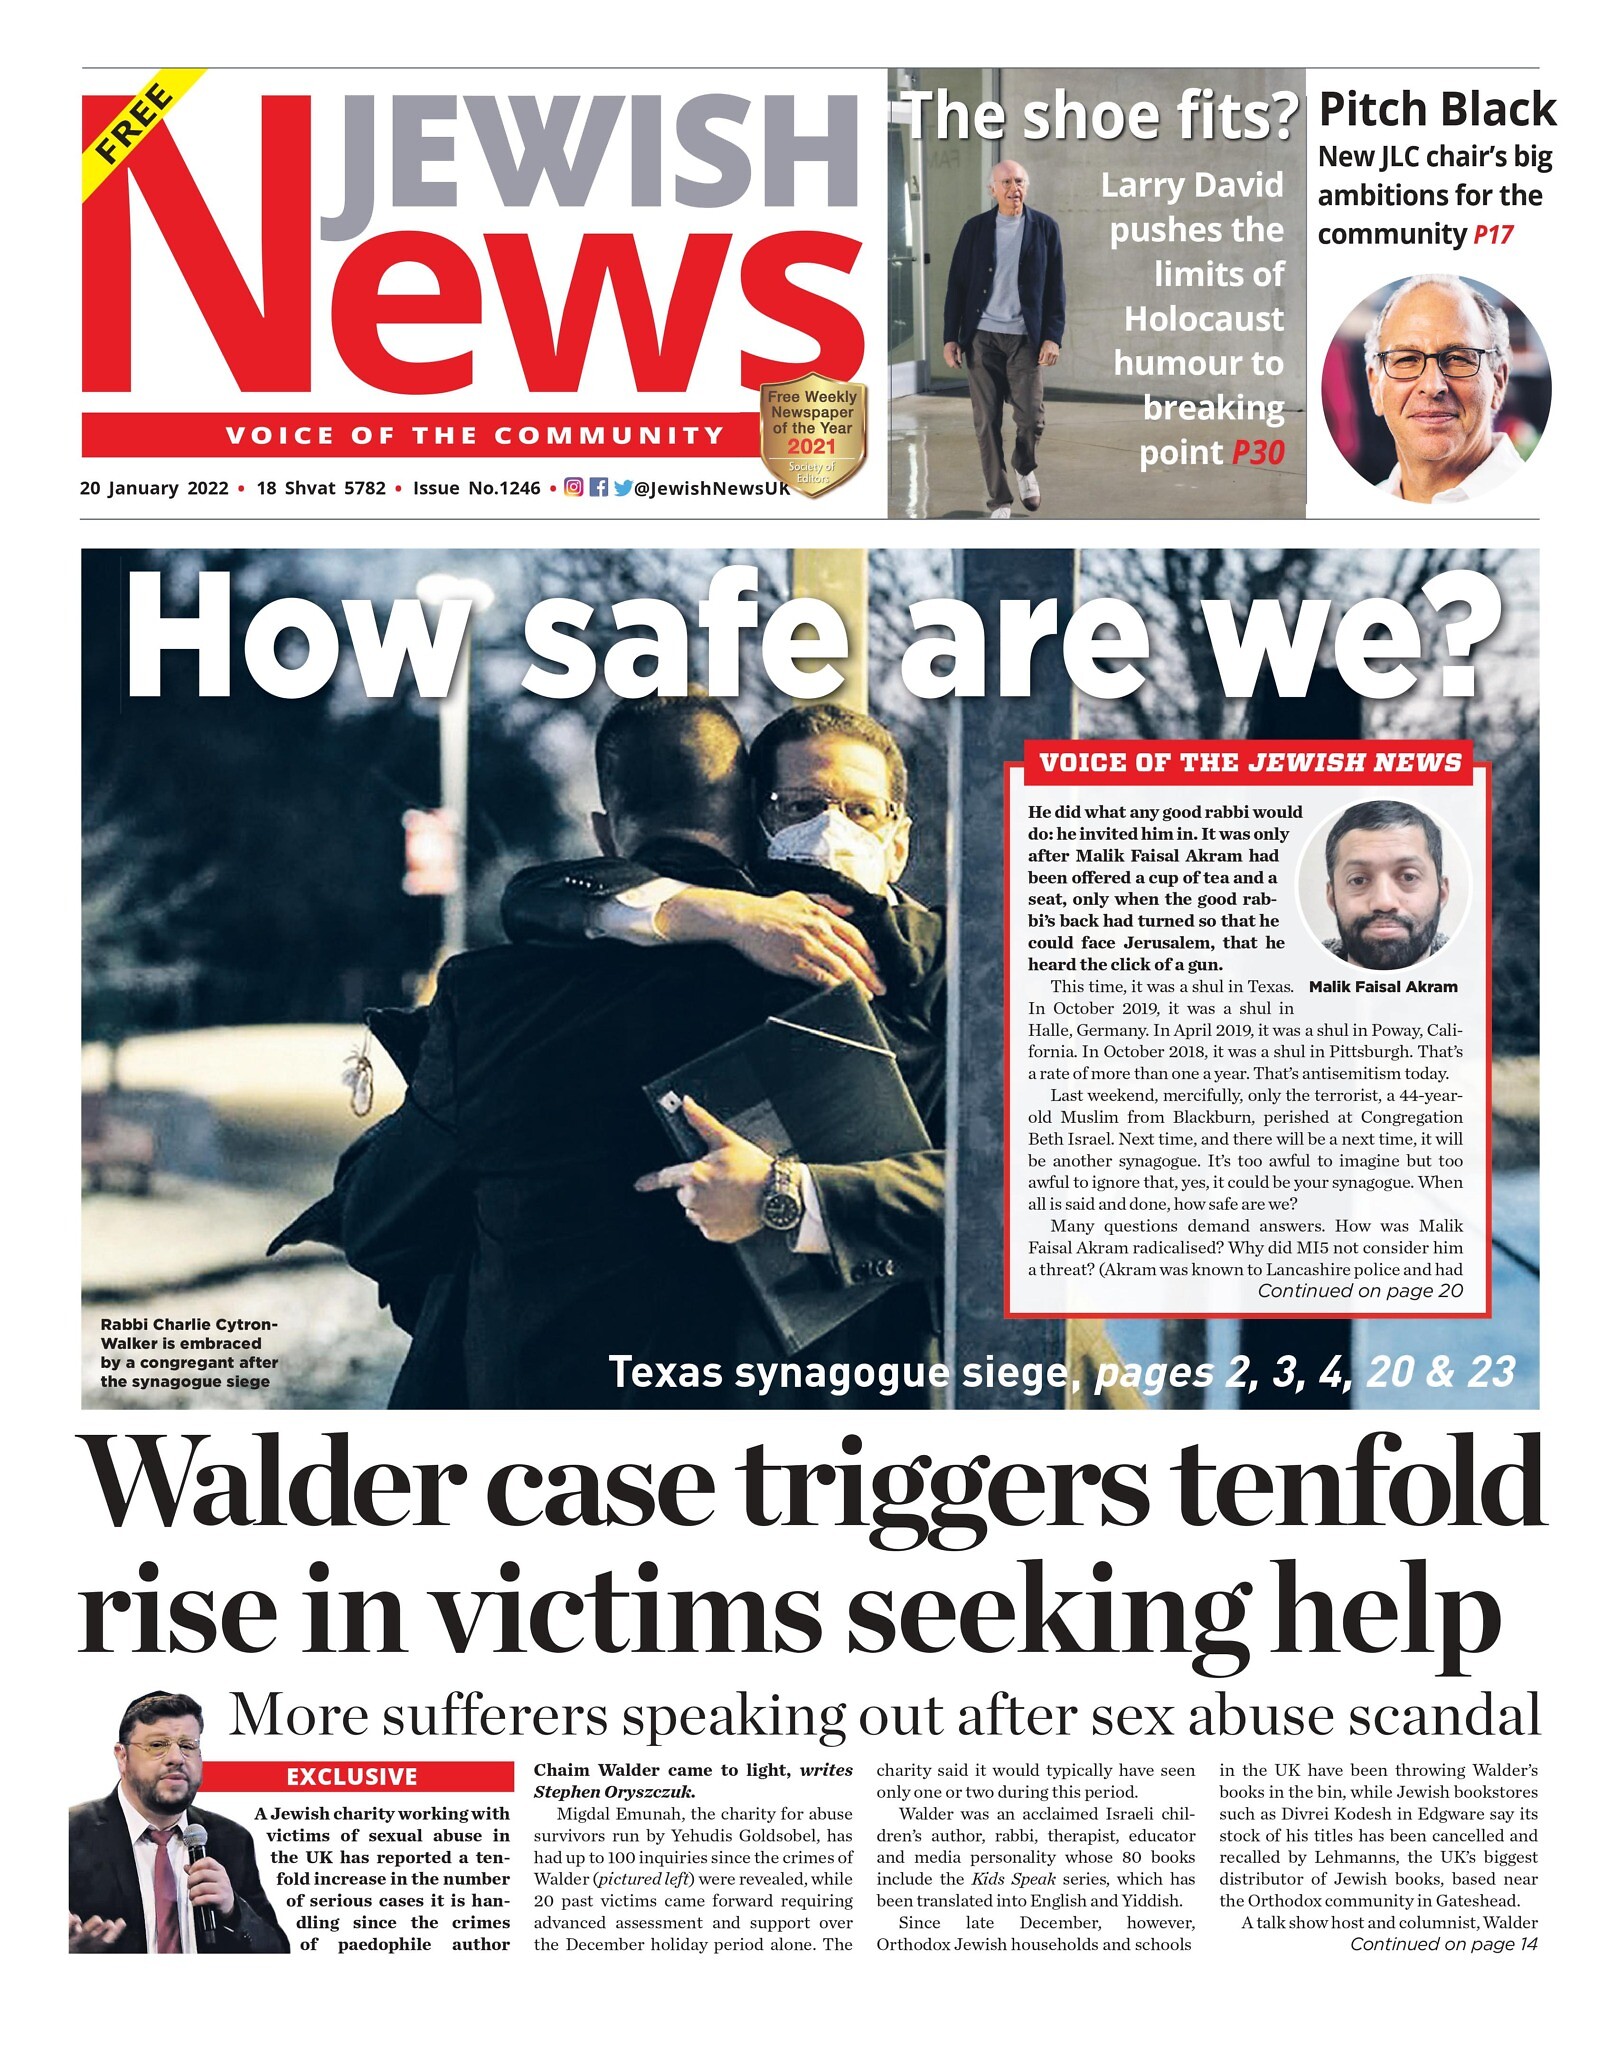 This week's front page